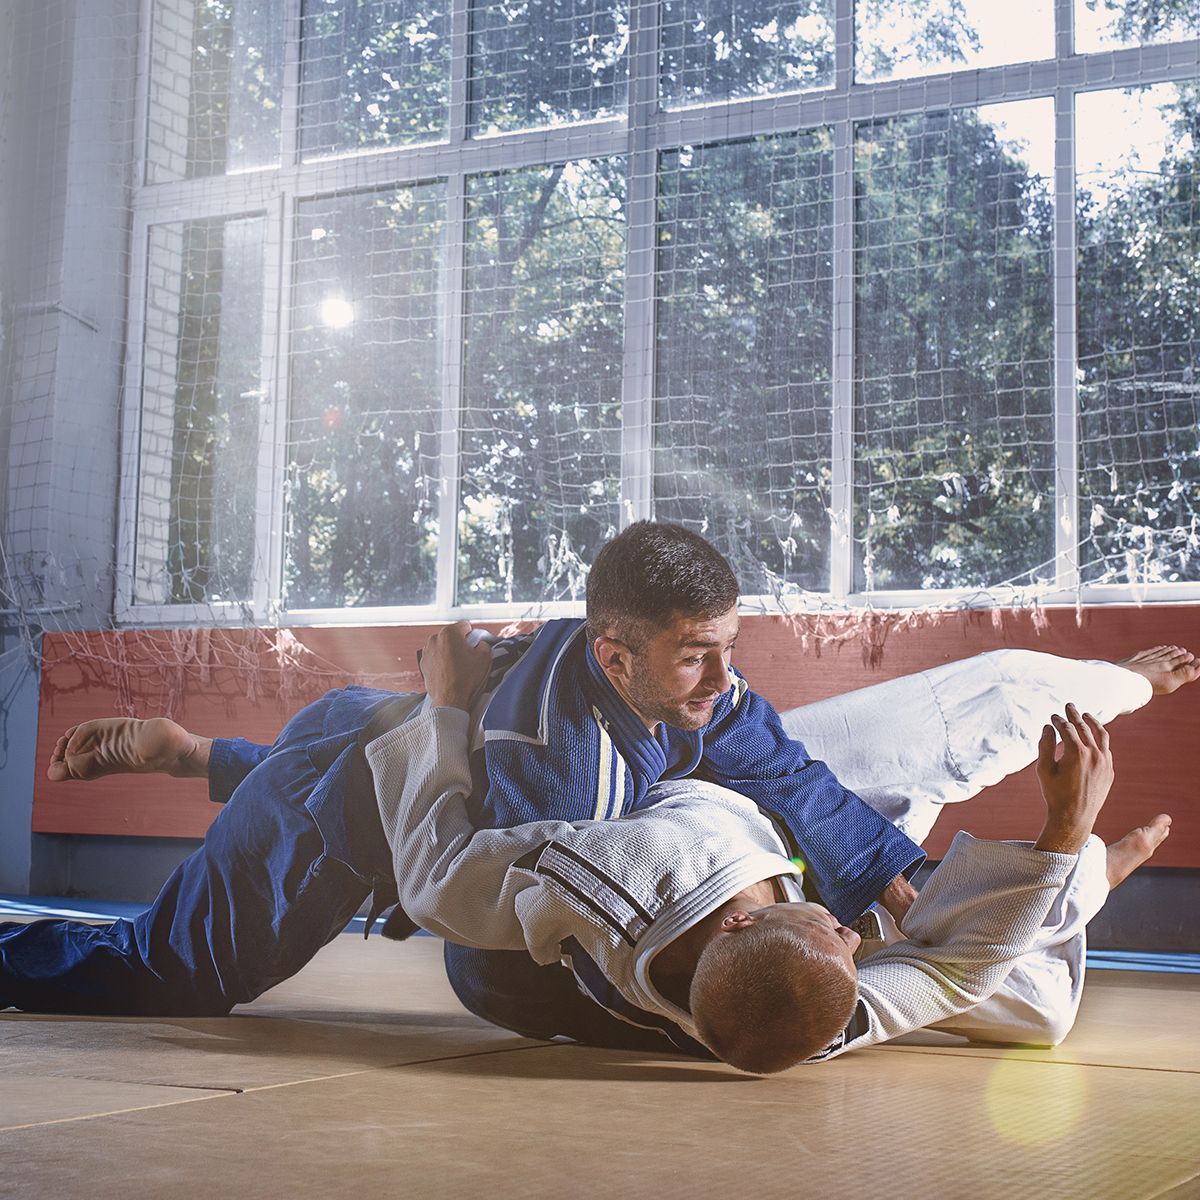 Two men are practicing judo on the floor in a gym.